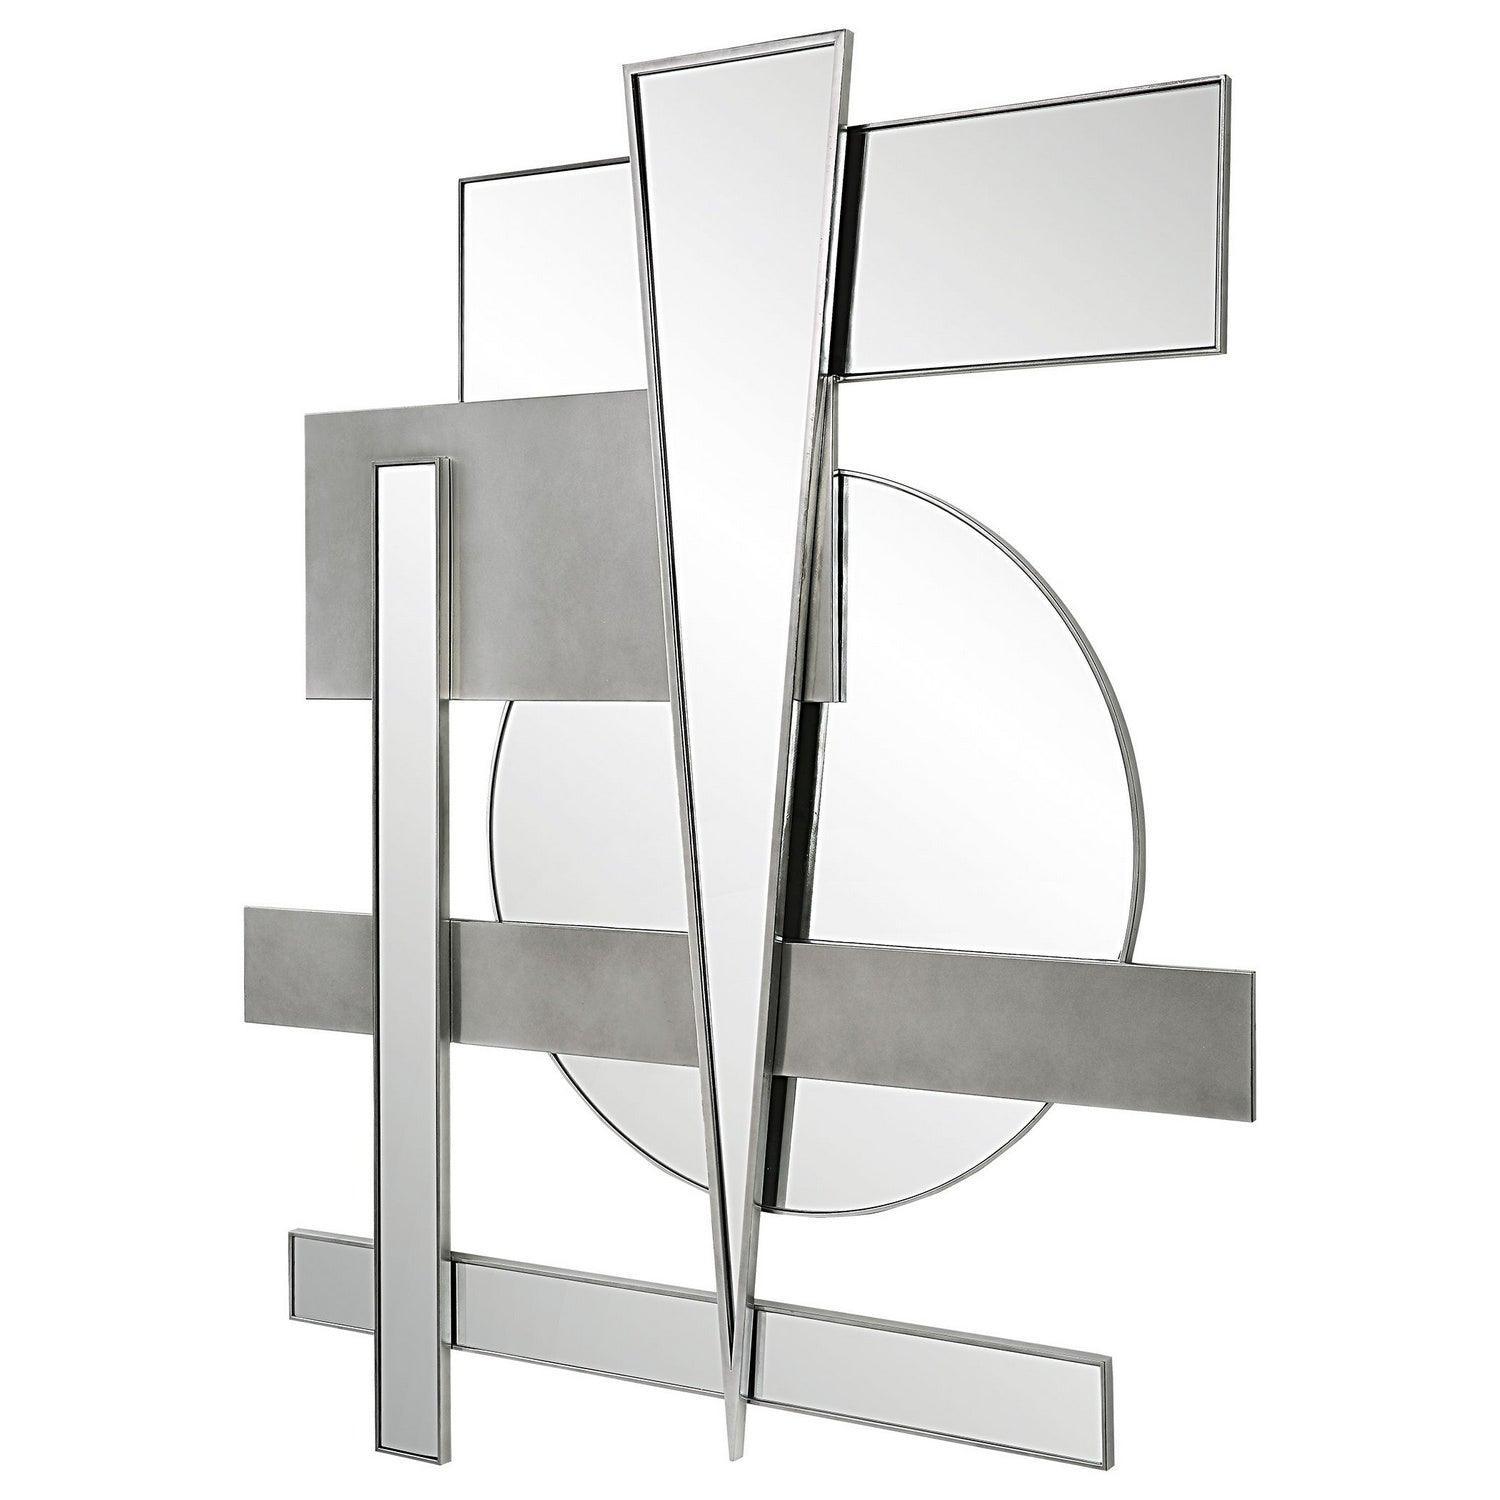 The Uttermost - Wedge Wall Decor - 04306 | Montreal Lighting & Hardware